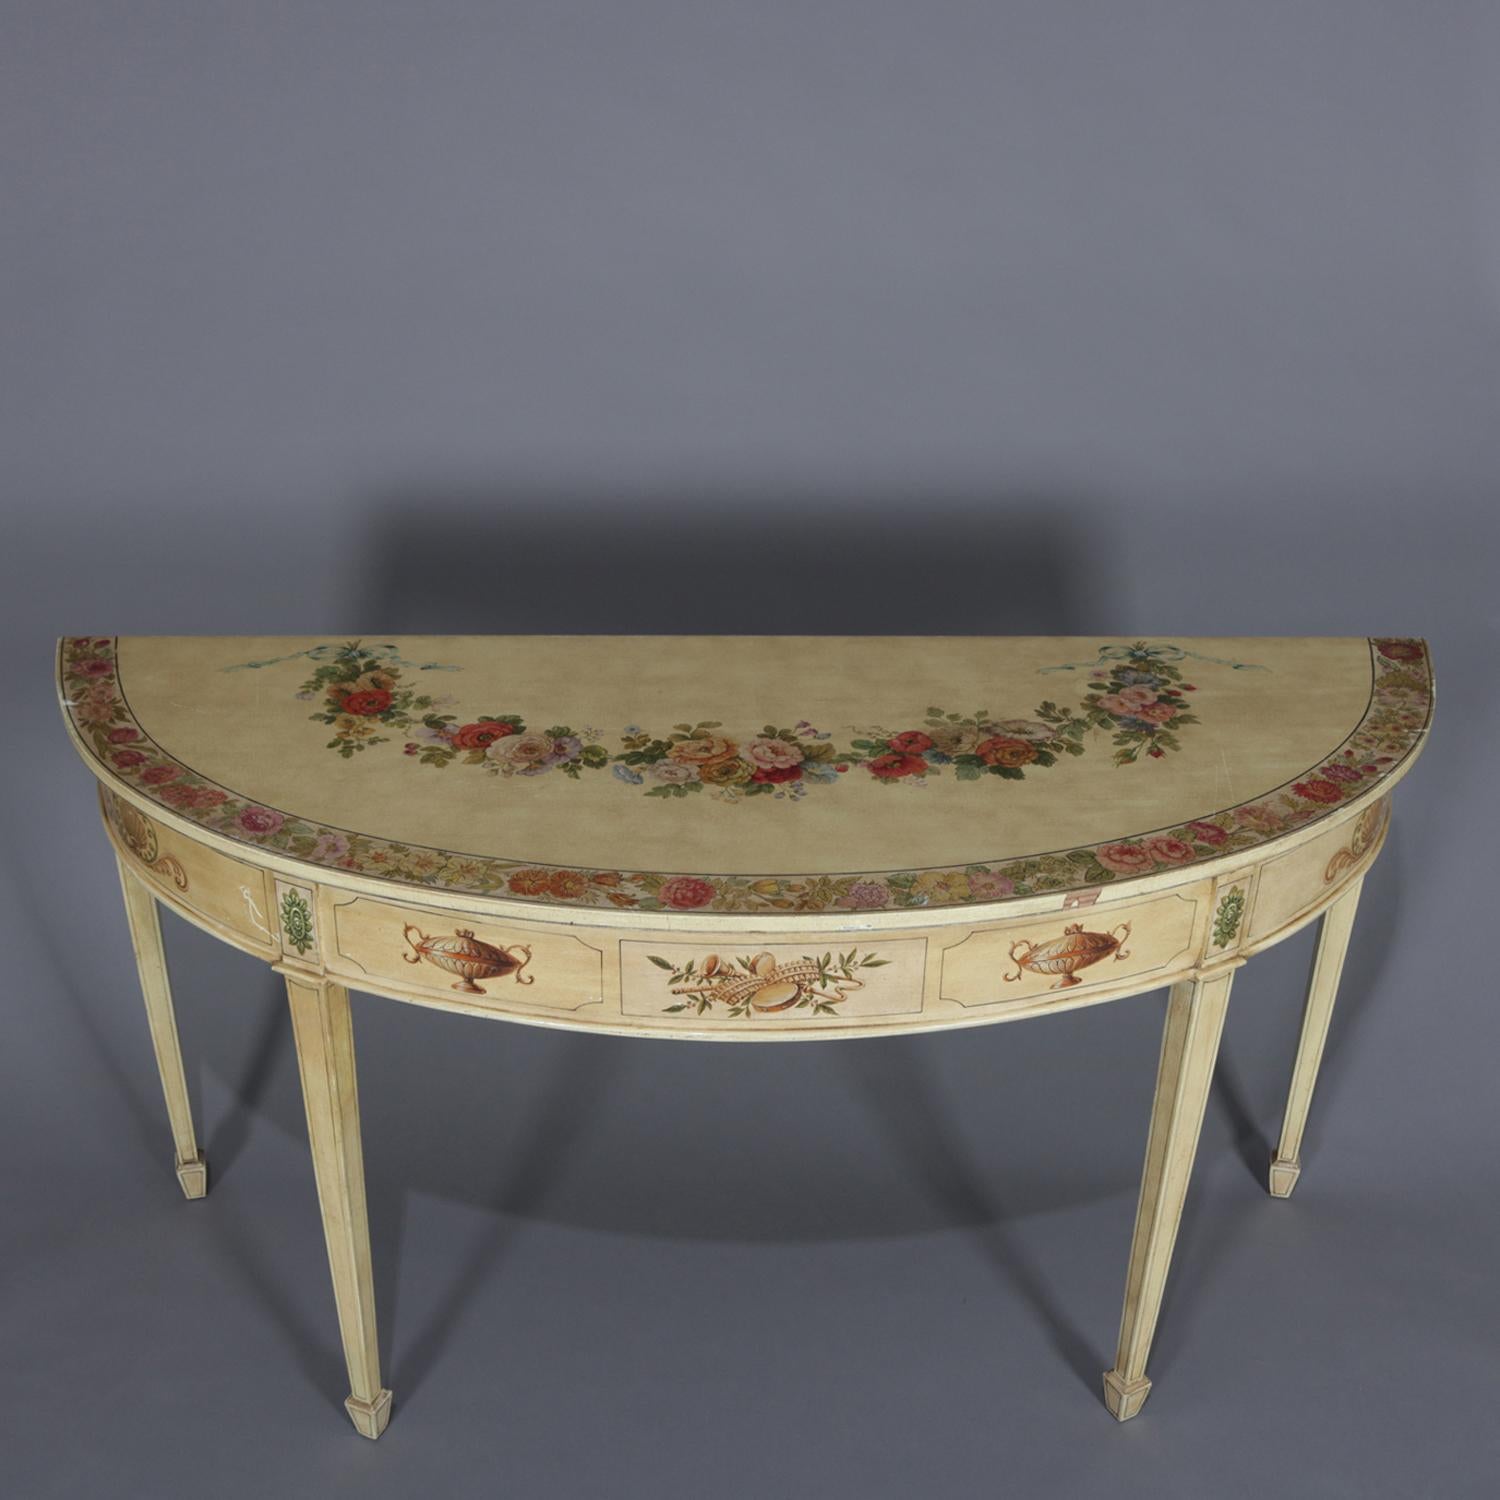 A vintage French neoclassical style demilune console table features antiqued demilune form having paint decorated top with floral swags surmounting paneled and decorated apron with reserves of floral, acanthus foliate, musical instruments and urns,